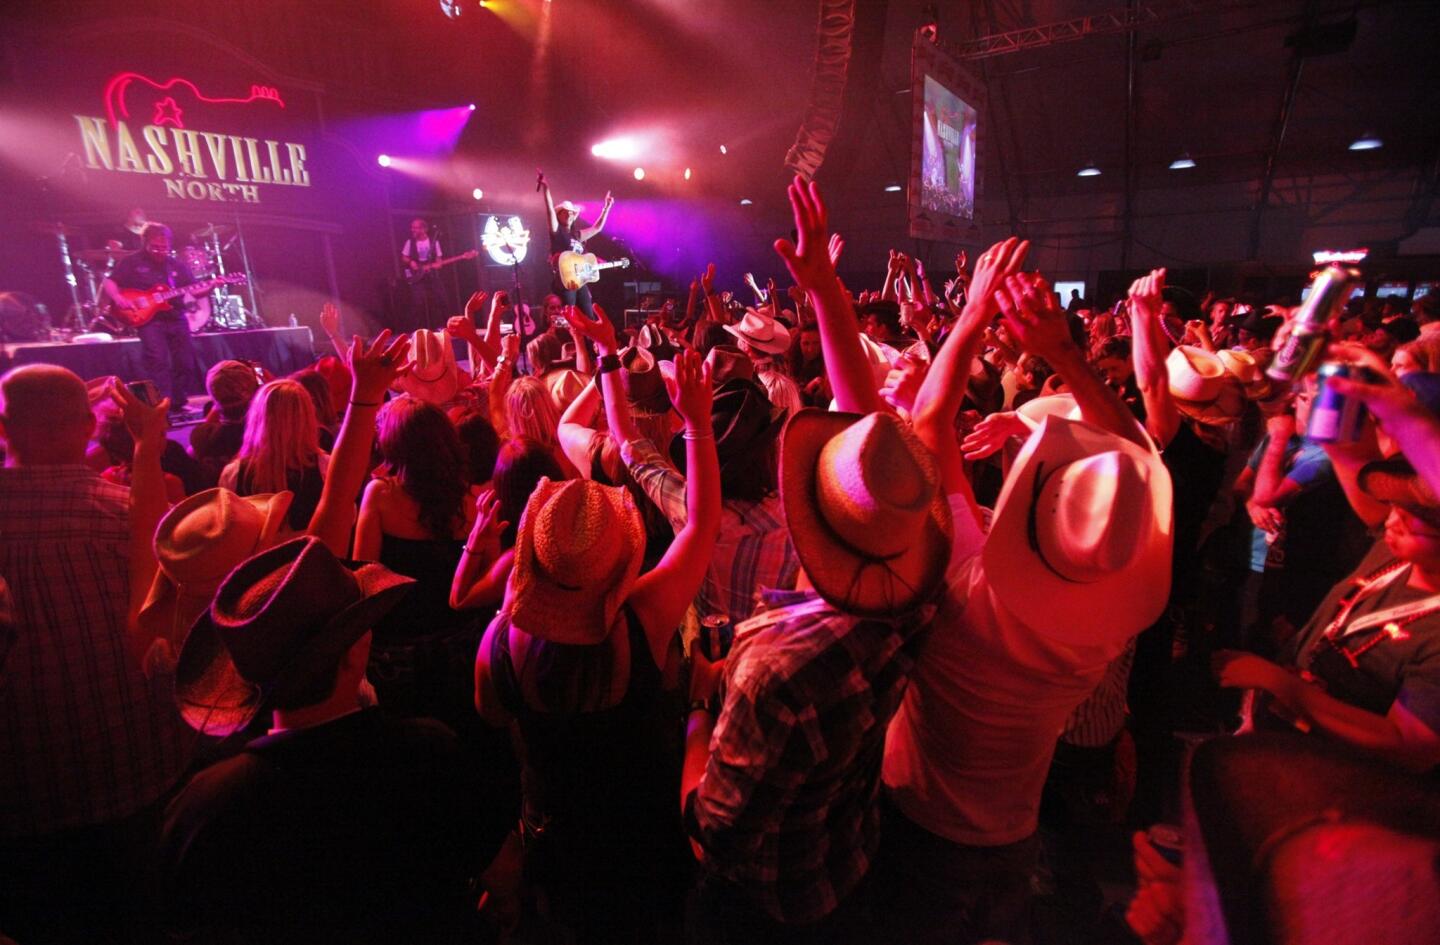 Concerts at the Calgary Stampede